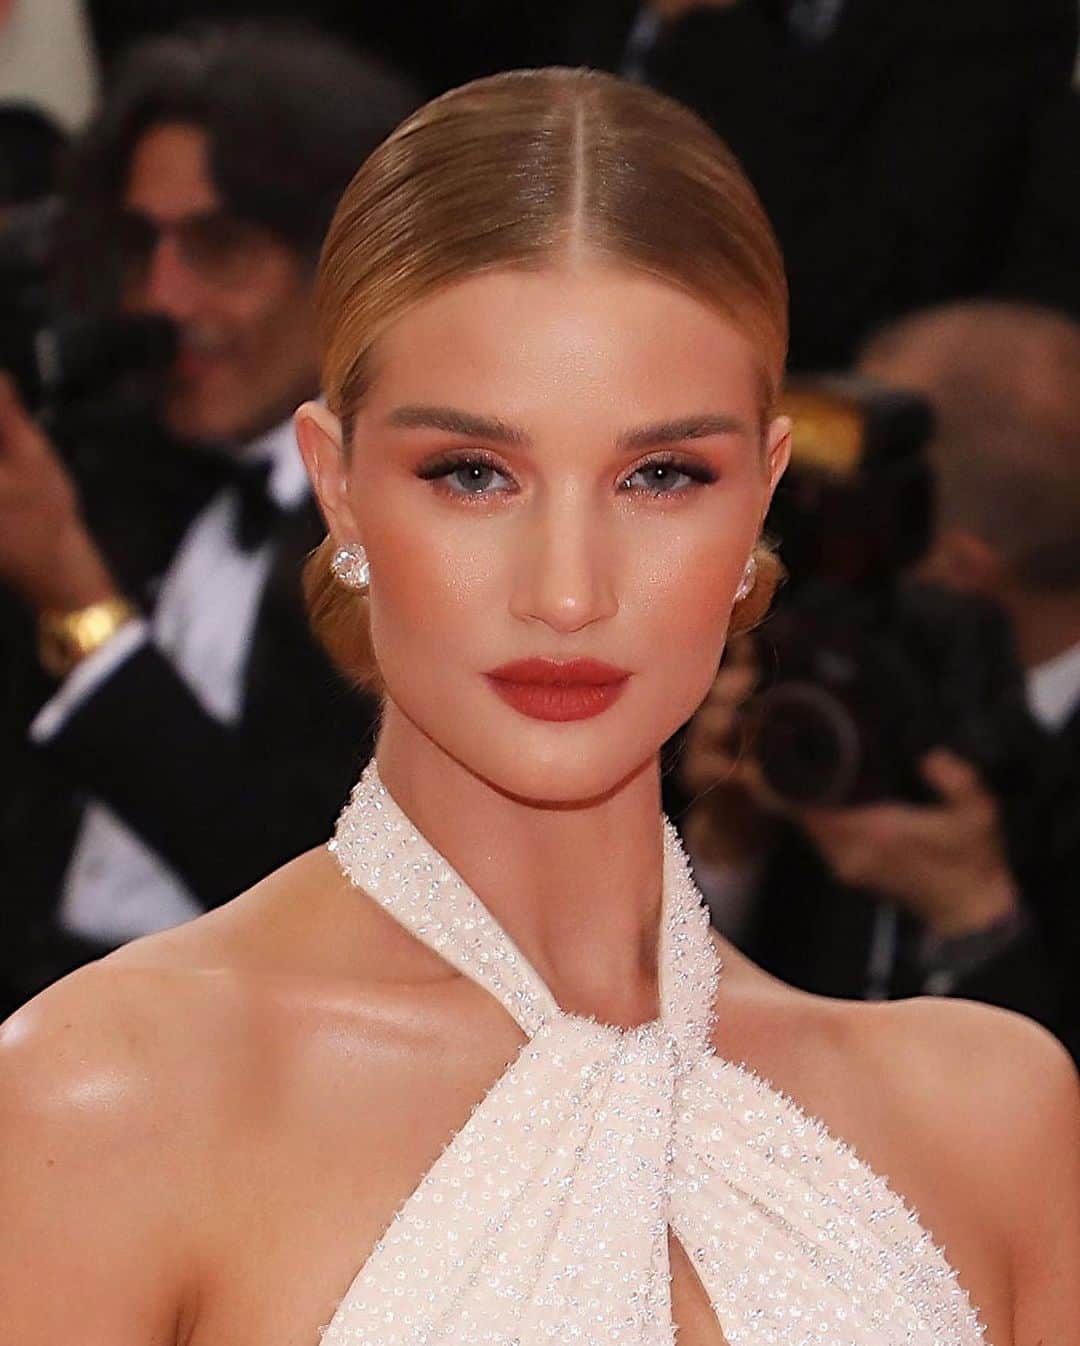 Hung Vanngoさんのインスタグラム写真 - (Hung VanngoInstagram)「@rosiehw last night for #MetGala2019 🧡🧡⚡️💫✨. Styled by @emmajademorrison @oscardelarenta 💅🏻 @ginaedwards_ 💇 @cwoodhair 💄 @hungvanngo using @chanel.beauty  @welovecoco #welovecoco #workingwithchanel Here is the products breakdown: SKIN PREP: Hydra Beauty Micro Liquid Essence Hydra Beauty Camellia Water Cream Illuminating Hydrating Fluid Hydra Beauty Micro Gel Yeux Intense Smoothing Eye Gel Hydra Beauty Nourishing Lip Care Hydra Beauty Essence Mist  COMPLEXION: Les Beiges Eau de Teint Foundation in “Medium Light” Le Correcteur de Chanel Longwear Concealer in shade “20” Soleil Tan de Chanel  Poudre Universelle Libre Natural Finish Loose Powder in shade “20”  CHEEKS: Poudre Lumiere in “30" Joues Contraste Powder Blush in shade “71 Malice"  BROWS: Stylo Soucils Waterproof in shade “806” Lê Gel Sourcils in shade “350”  EYES: Stylo Yeux Waterproof in shade “943 Brun Agape” Les 4 Ombré in “Lumieres Naturalles” Inimitable Intense Multi-Dimentionnel Sophistique Mascara in "10 Noir”  LIPS: The mixture of Rouge Allure  Velvet Extrême in shades “112 Idéal & 122 Chestnut”.」5月8日 0時31分 - hungvanngo